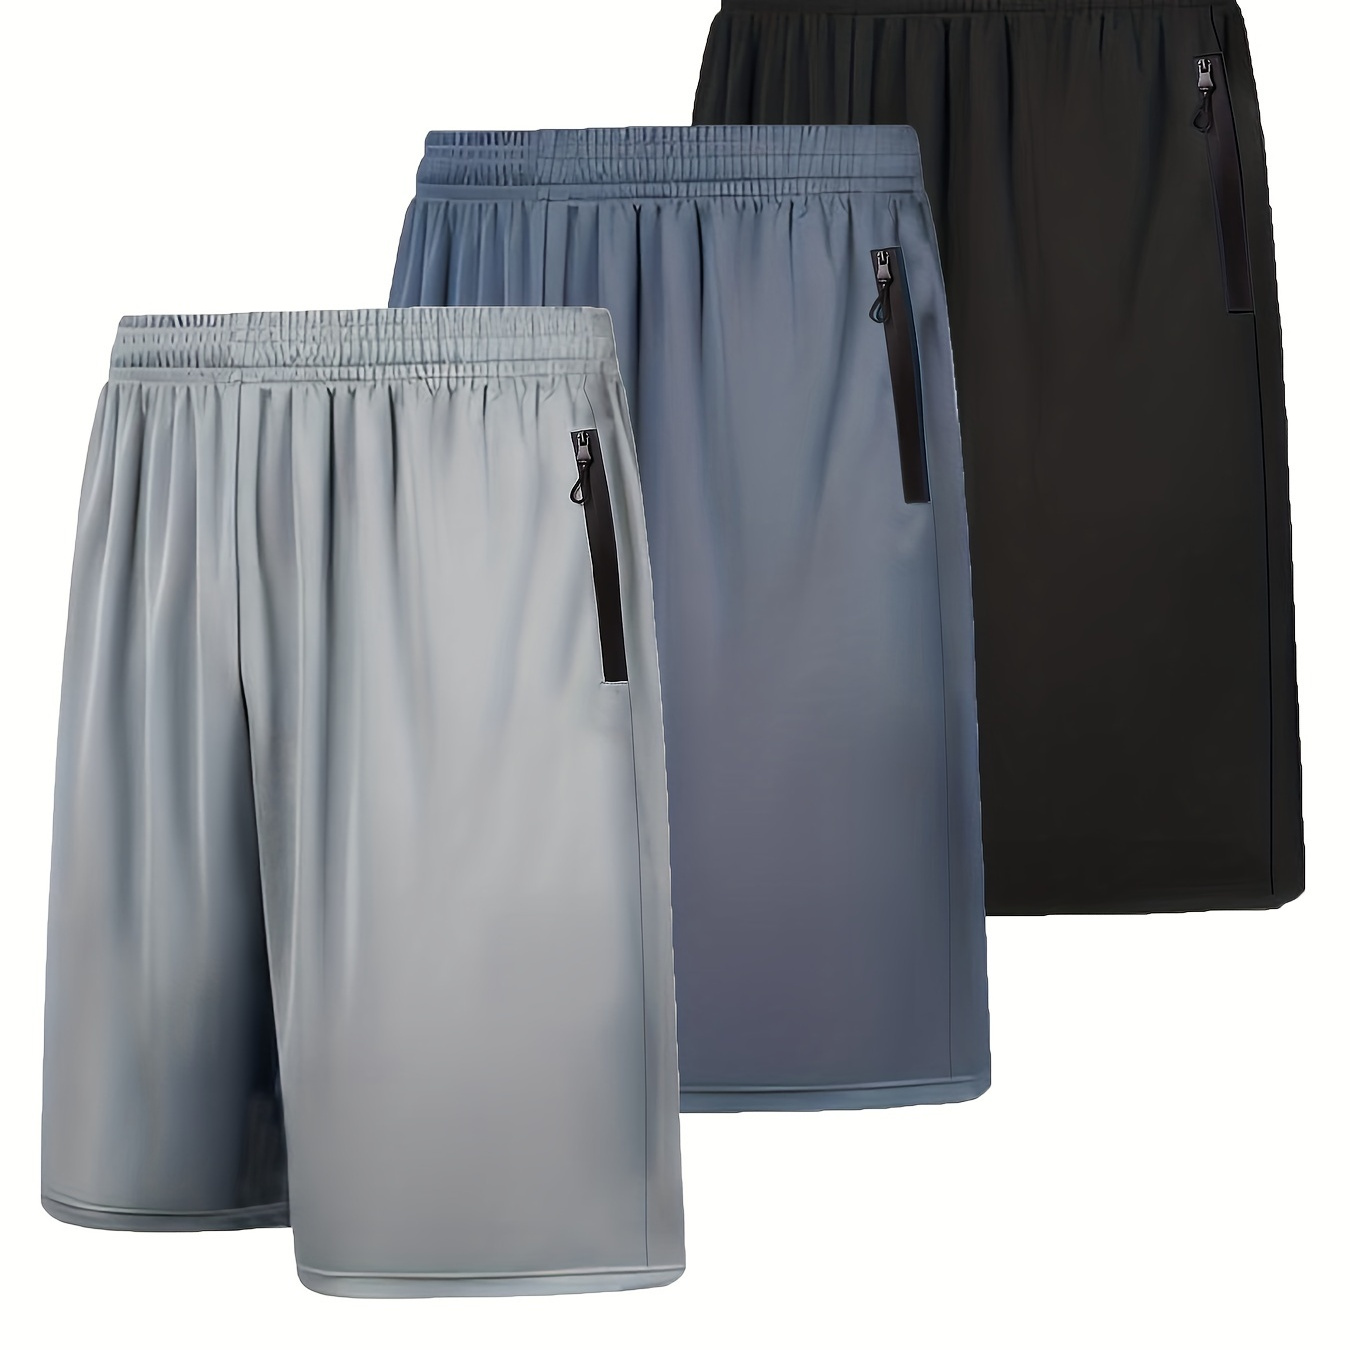 

3 Pack Men's Athletic Shorts With Drawstring And Pockets In Solid Color, Lightweight And Comfortable For Summer Sports And Fitness